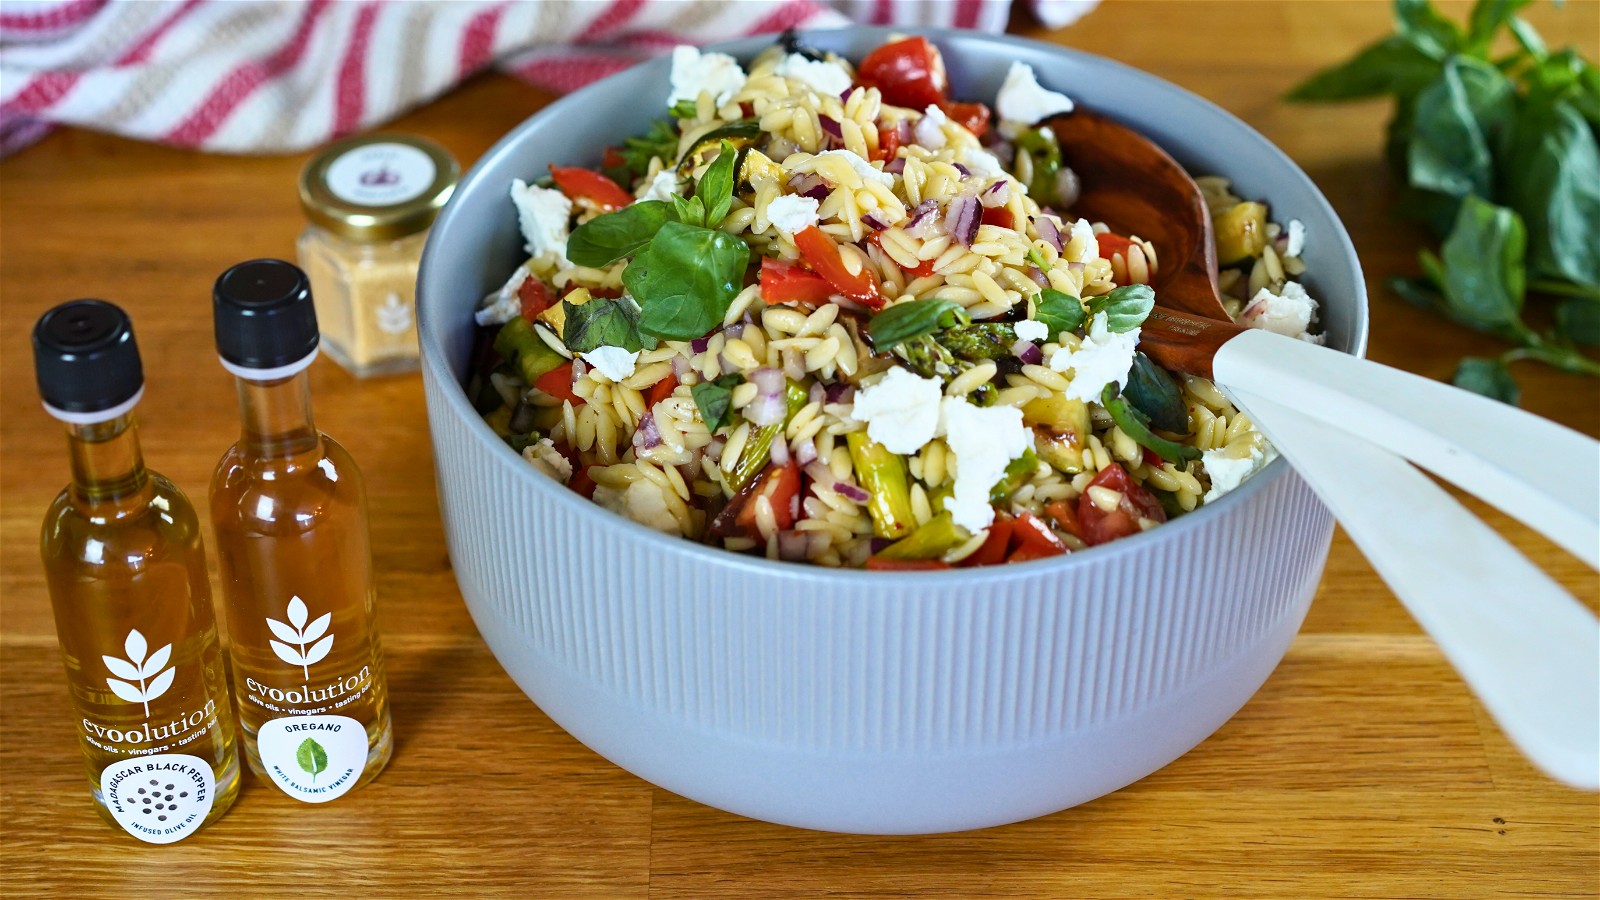 Image of Grilled Vegetable Orzo Salad with Black Pepper Olive Oil and Oregano Balsamic